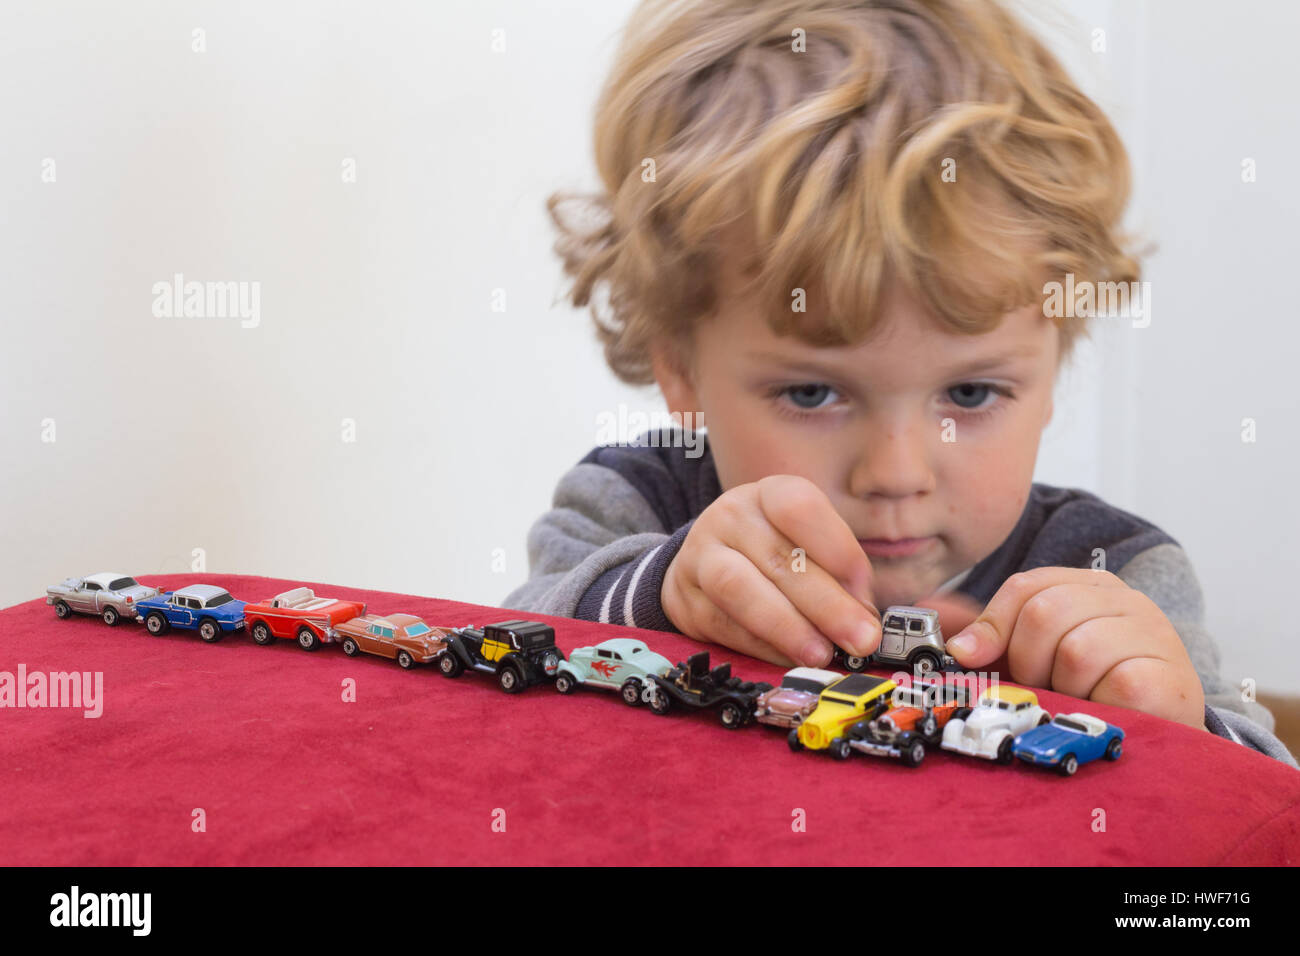 QUEENSTOWN, SOUTH AFRICA - MAY 17 2015 - Little blonde boy playing with vintage toy cars on red velvet pouf chair - Focus on his hands and little cars Stock Photo